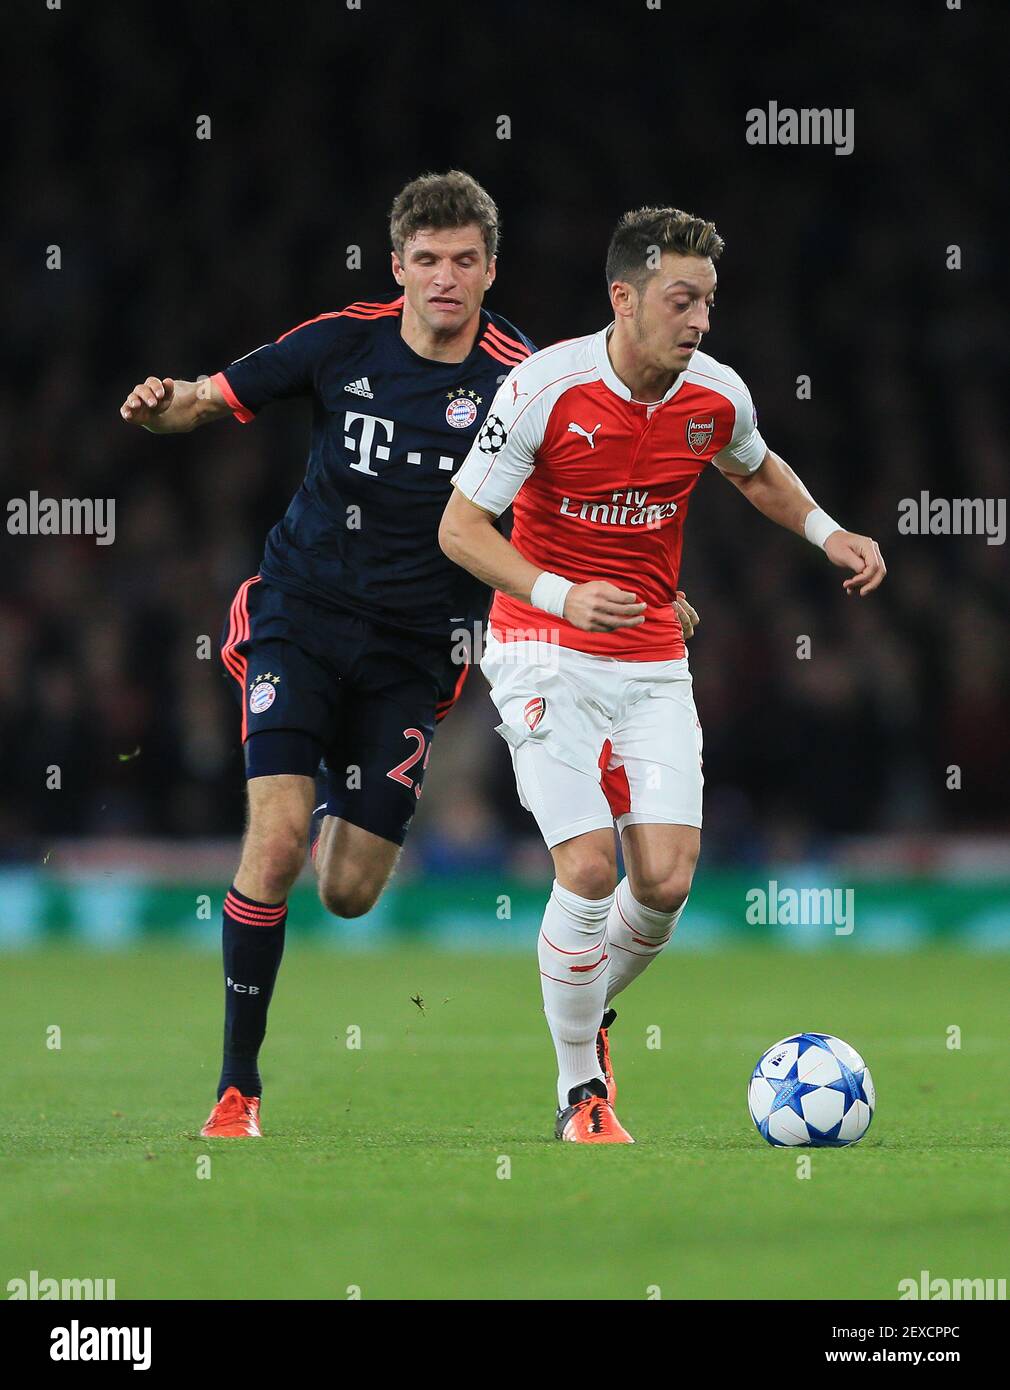 30+ Arsenal Vs Munchen 2015 Pictures